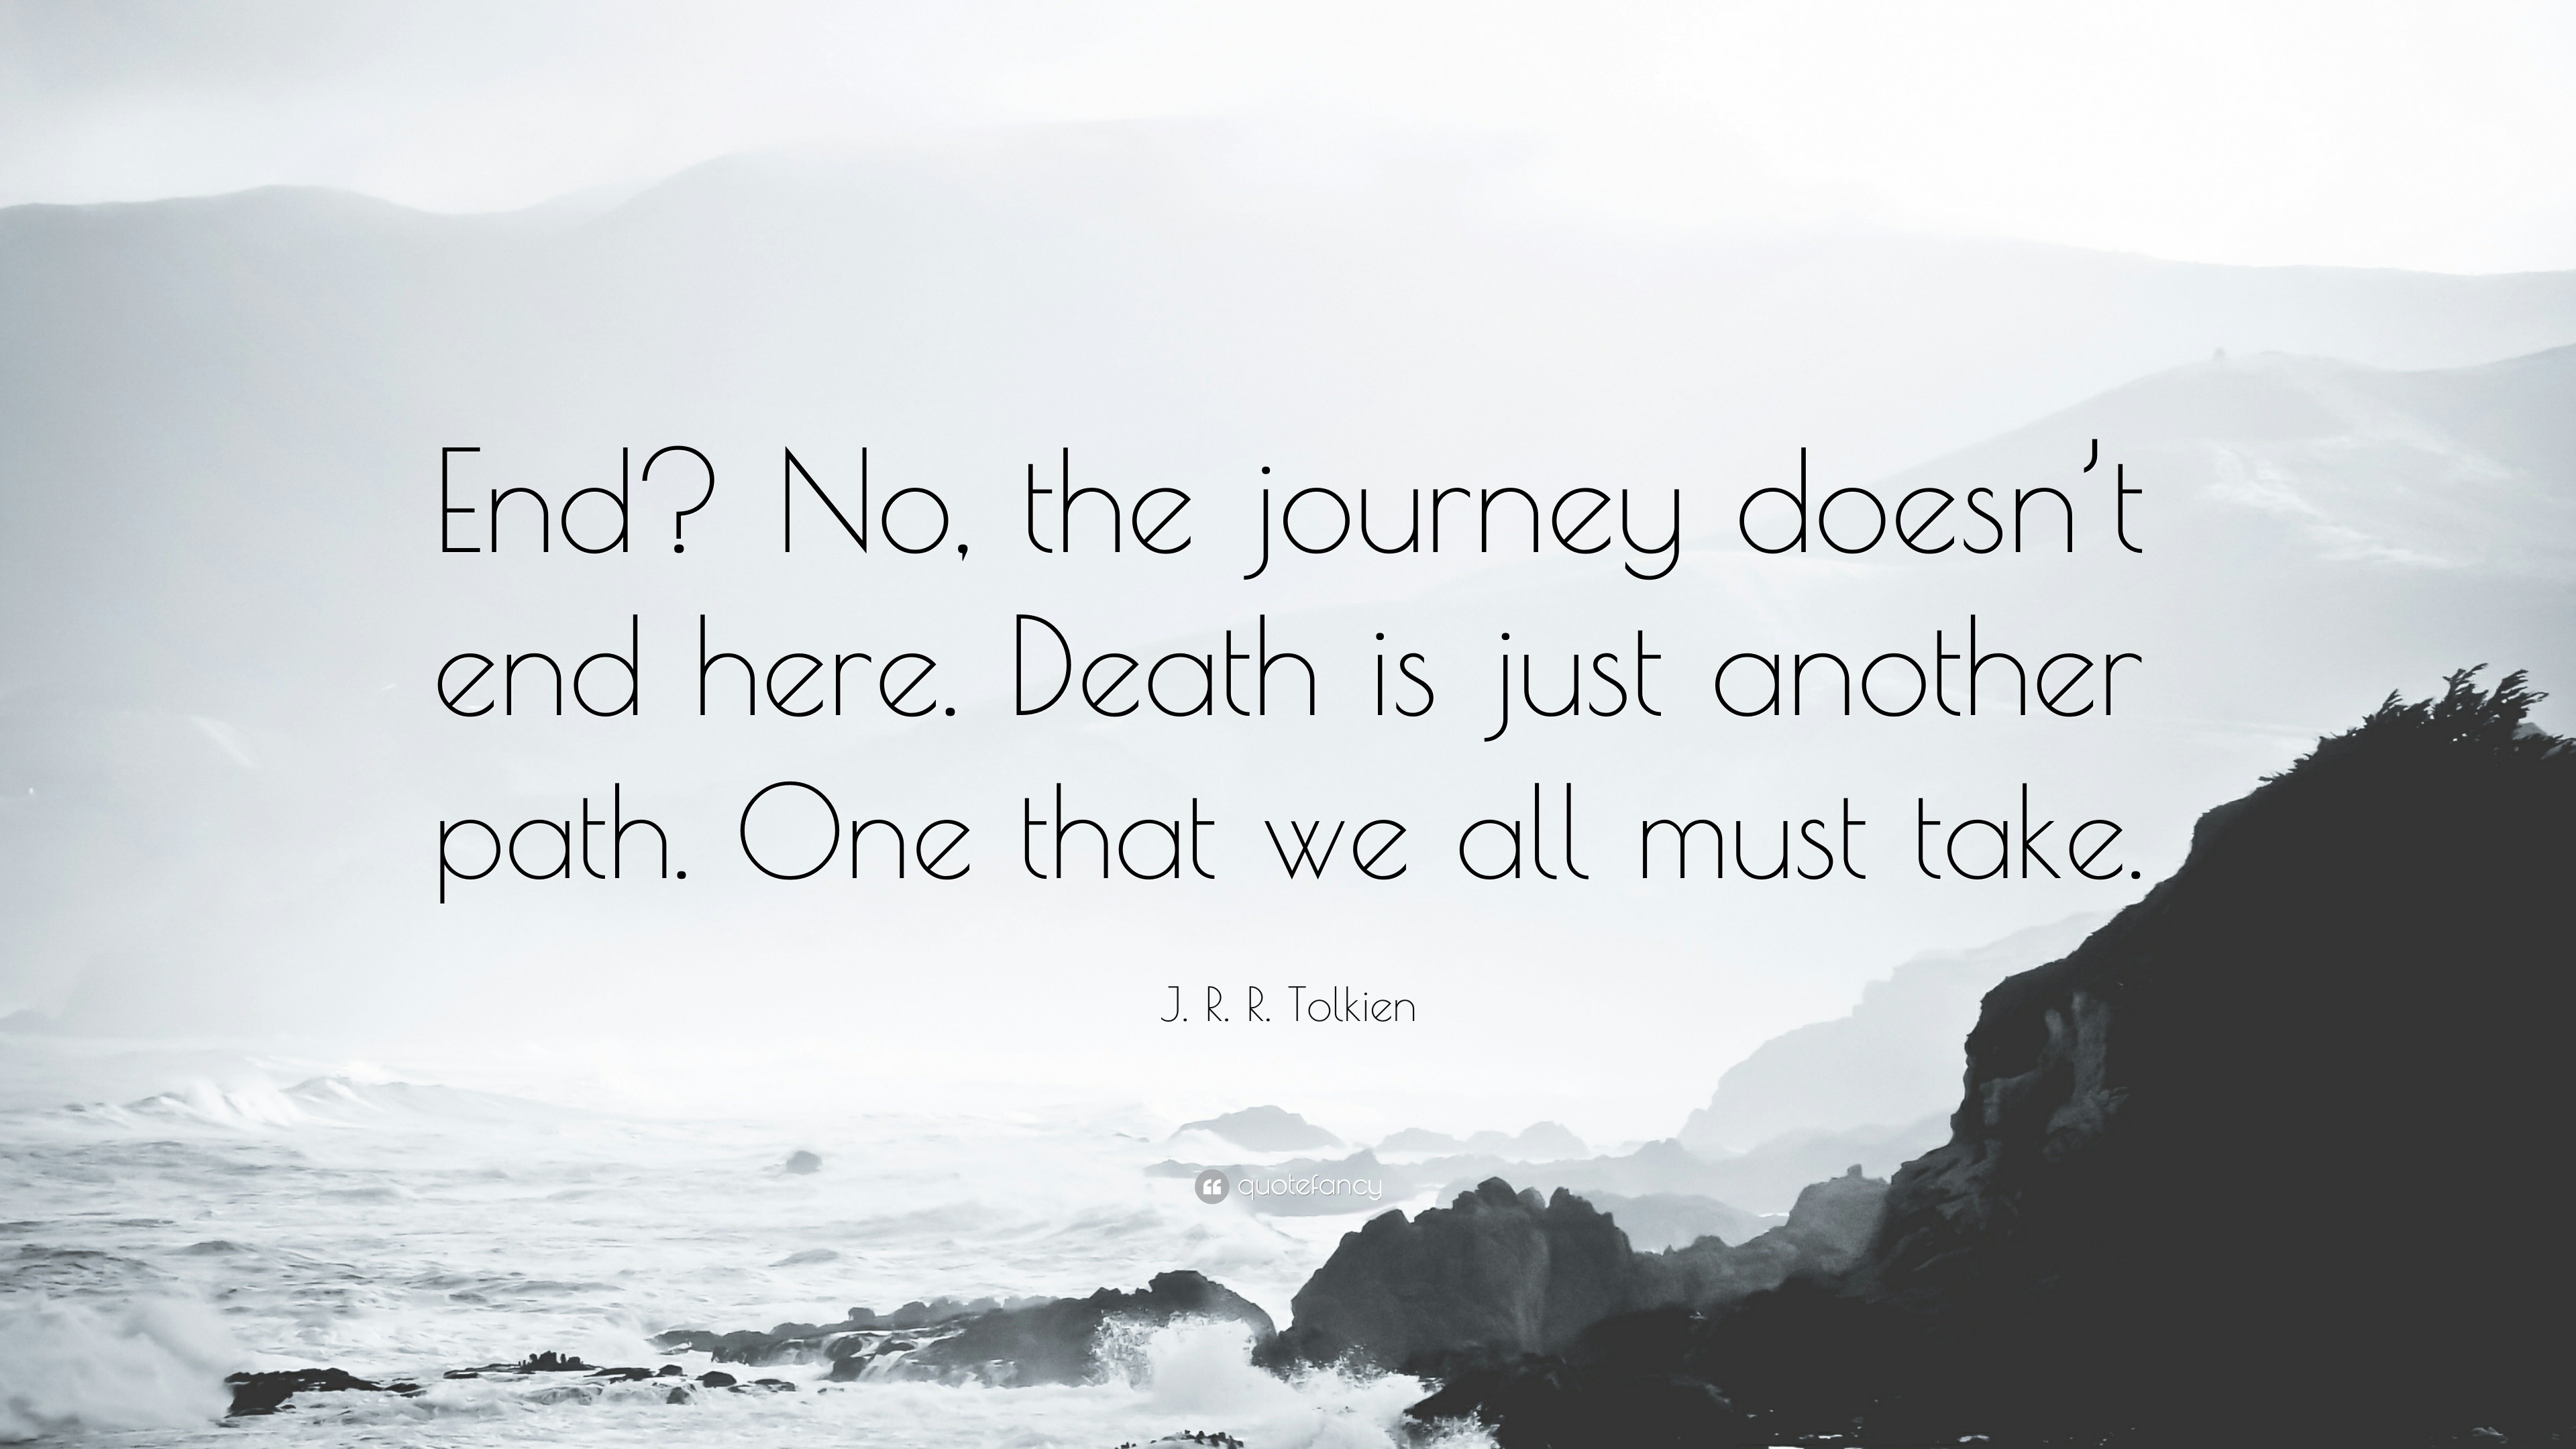 J R R Tolkien Quote End No The Journey Doesn T End Here Death Is Just Another Path